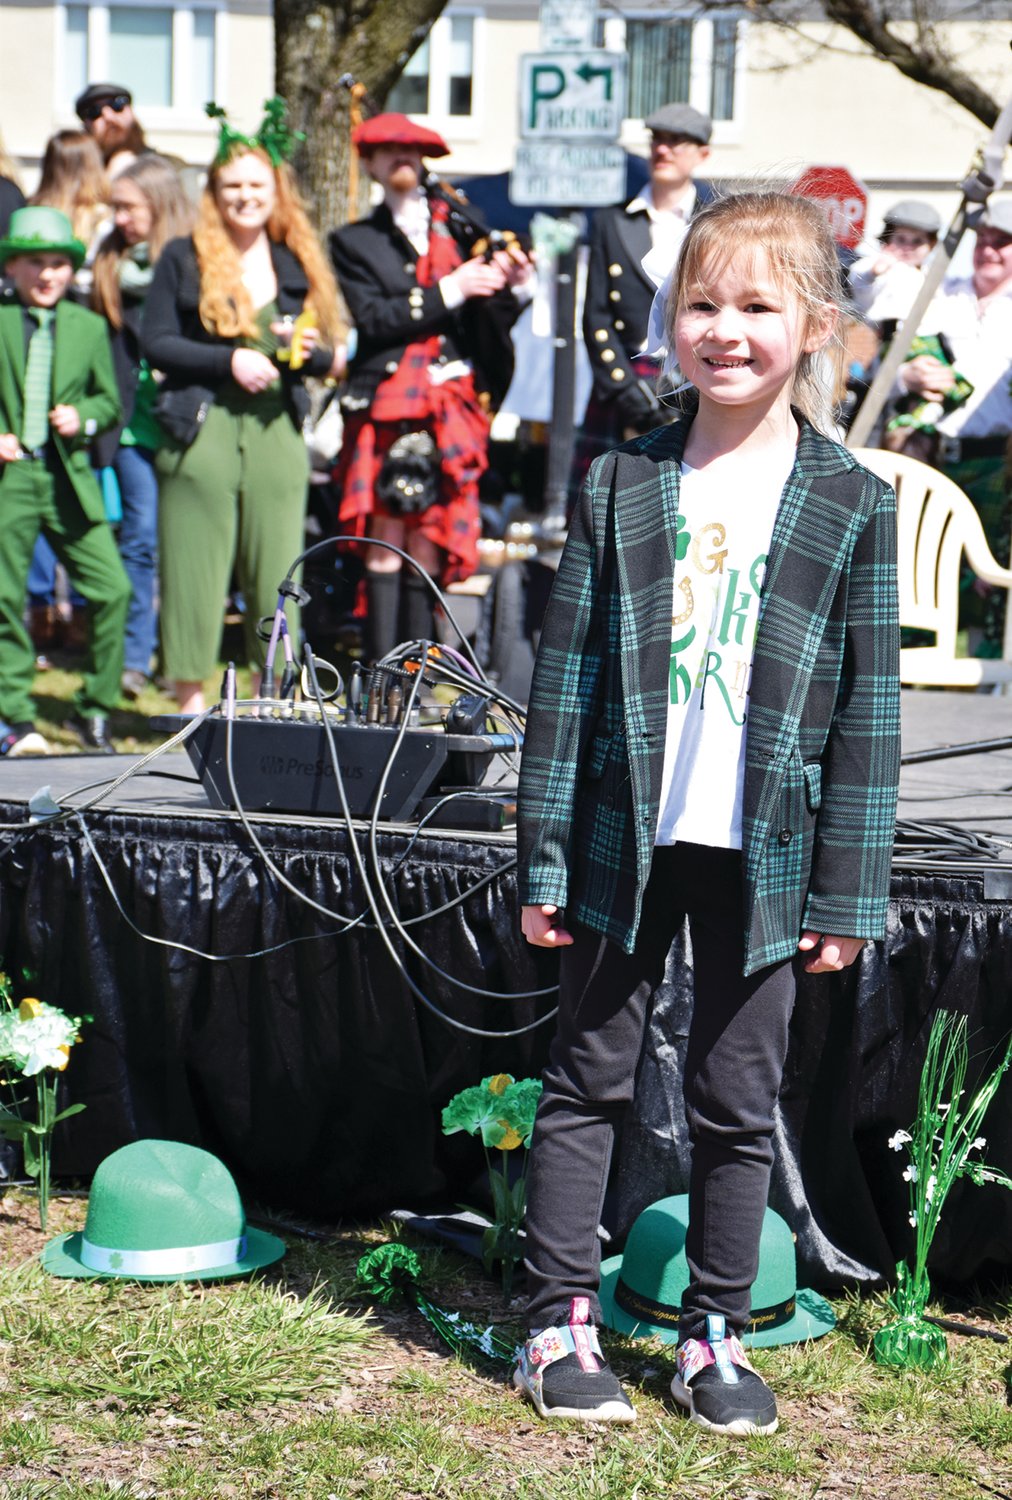 Delainey Grillo, one of the contestants in the Kids Celtic Costume Contest.